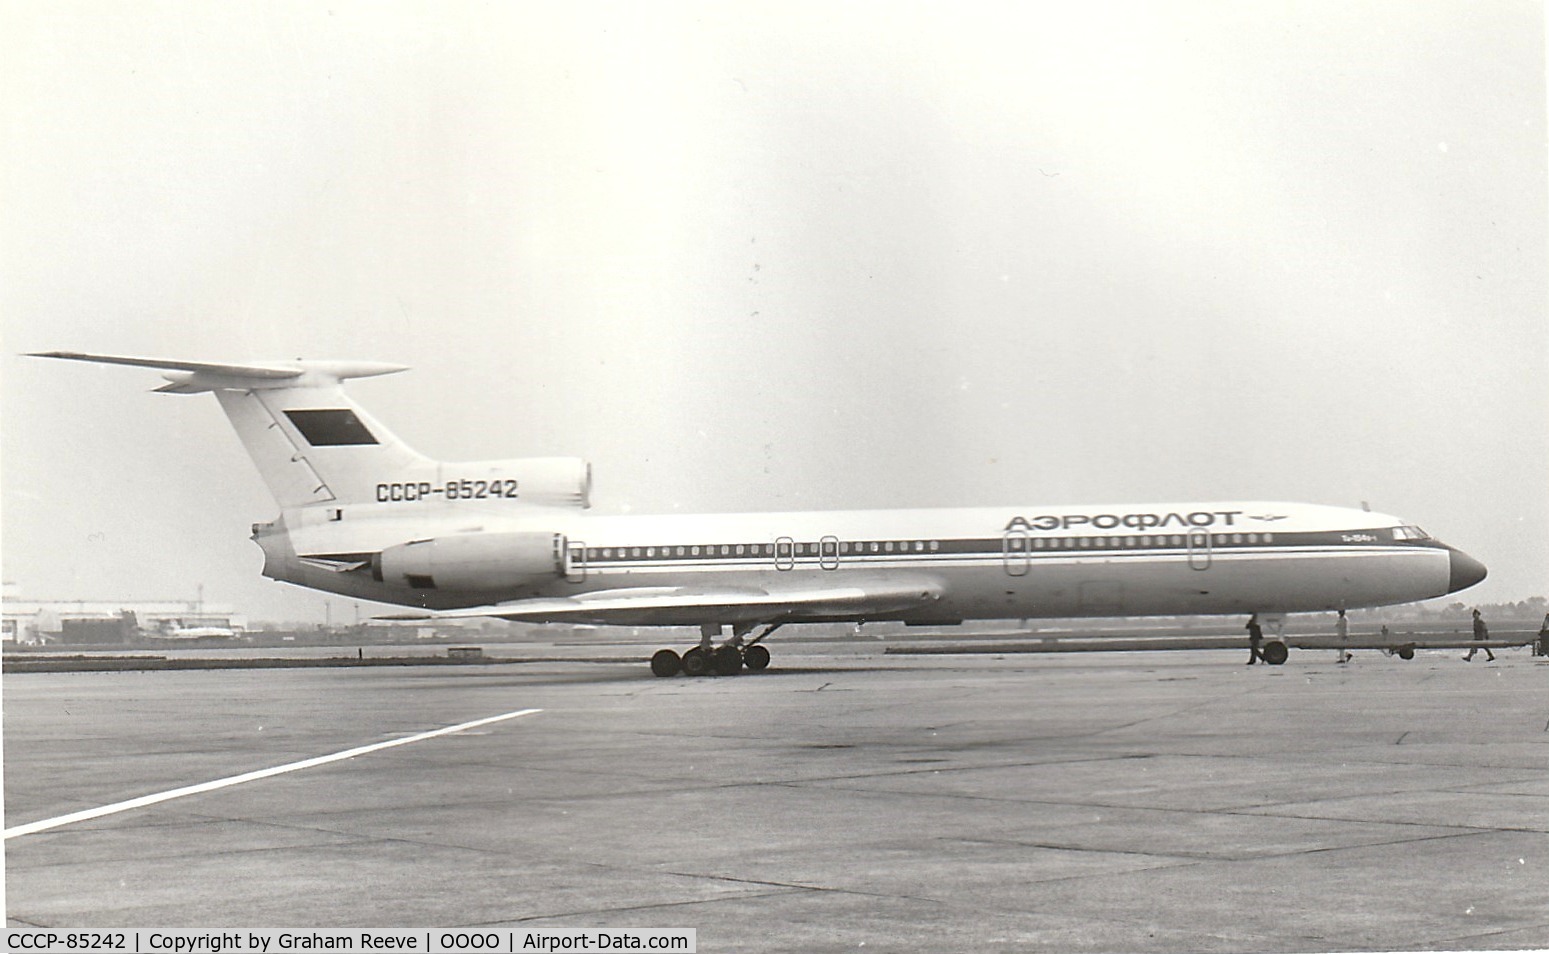 CCCP-85242, Tupolev TU-154B C/N 77A242, No information available as picture bought at car boot sale.